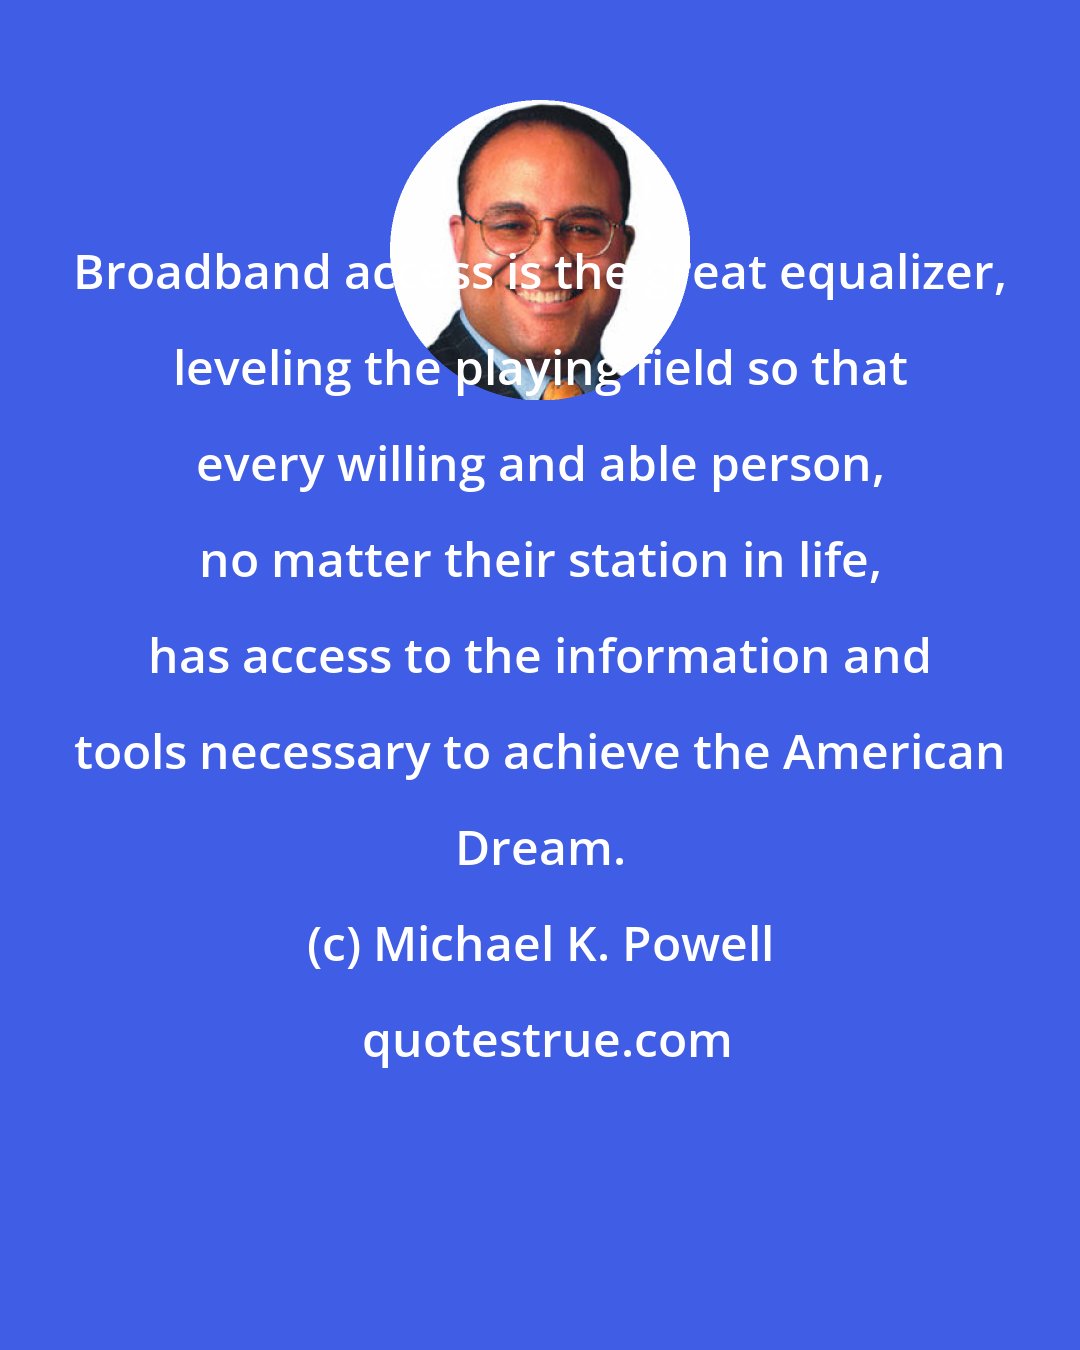 Michael K. Powell: Broadband access is the great equalizer, leveling the playing field so that every willing and able person, no matter their station in life, has access to the information and tools necessary to achieve the American Dream.